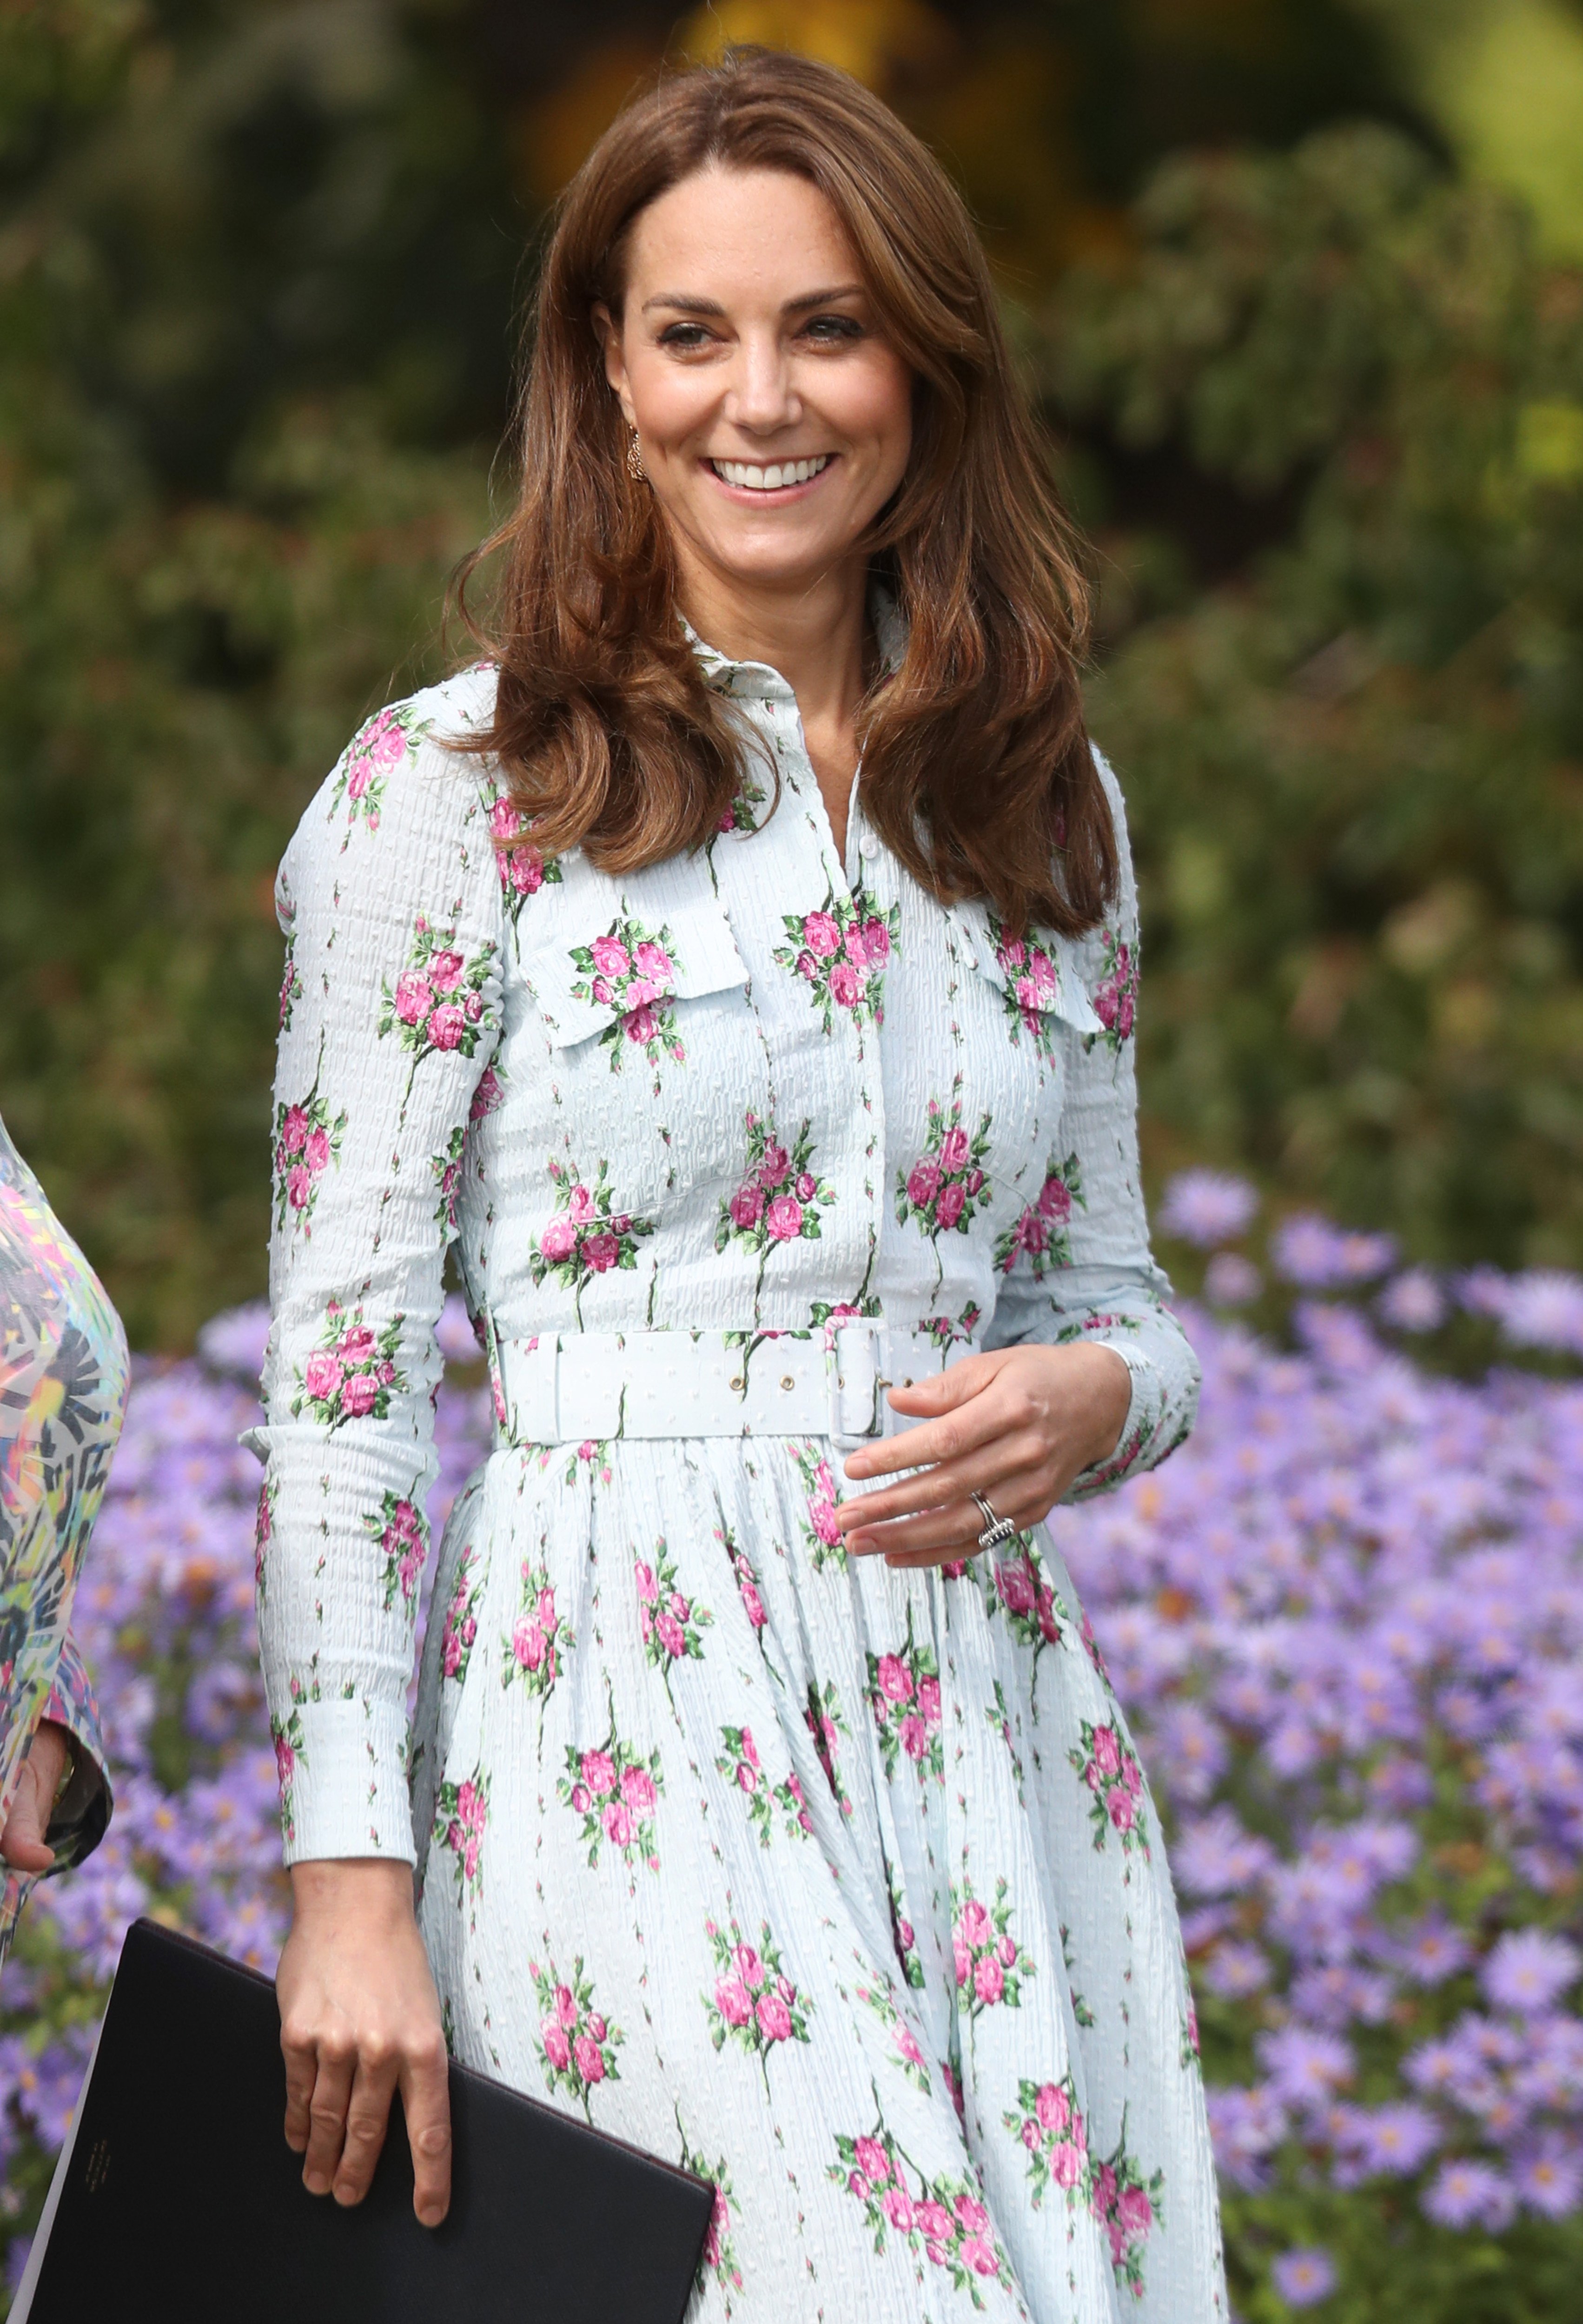 Kate au festival "Back to Nature" au RHS Garden Wisley | Photo: Getty Images